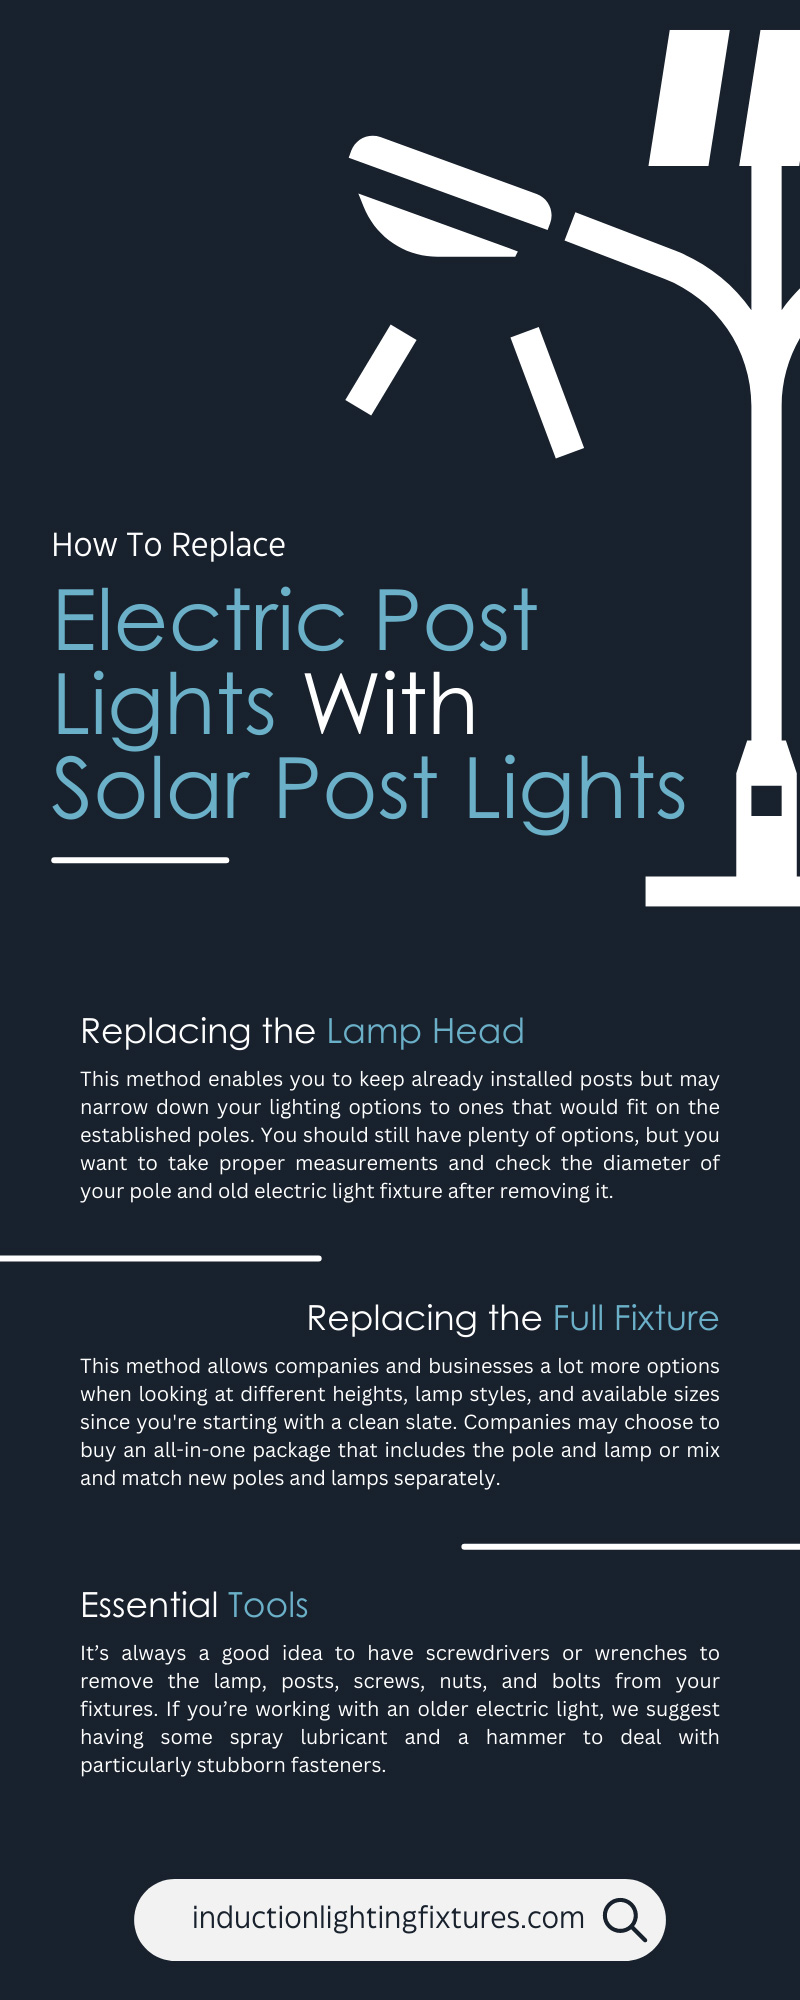 How To Replace Electric Post Lights With Solar Post Lights